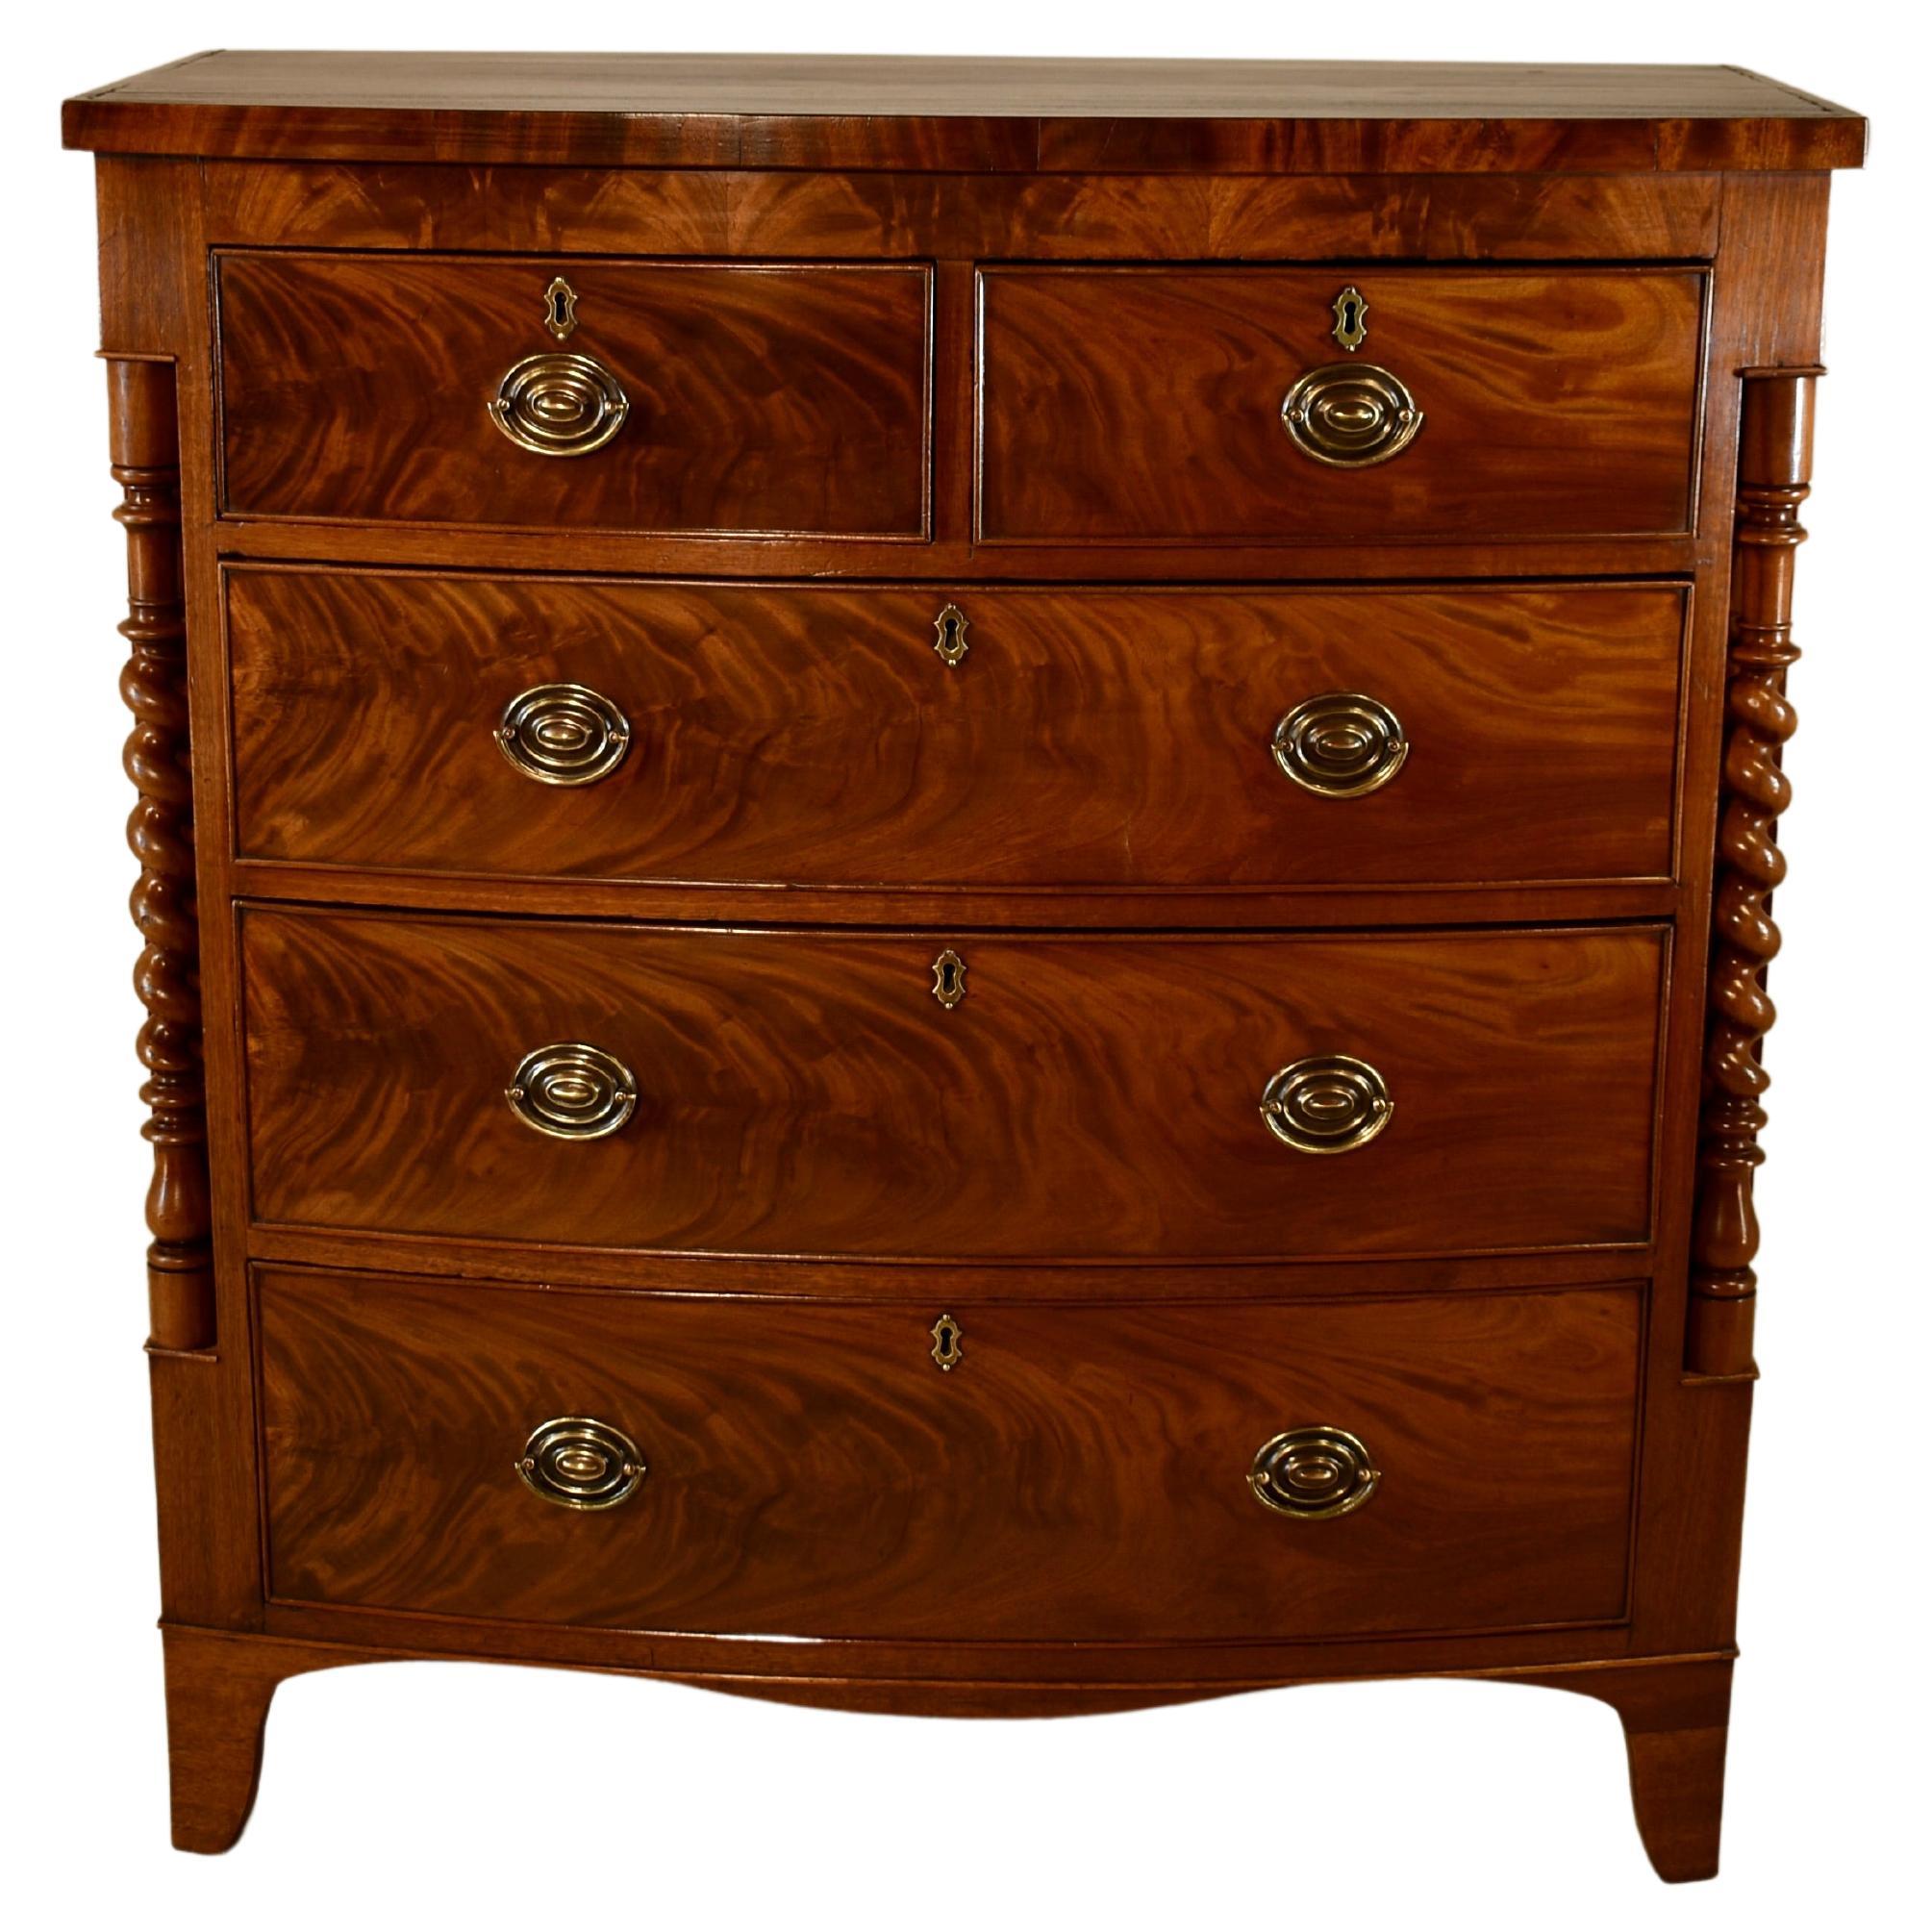 19th Century English Mahogany Bow Front Chest of Drawers